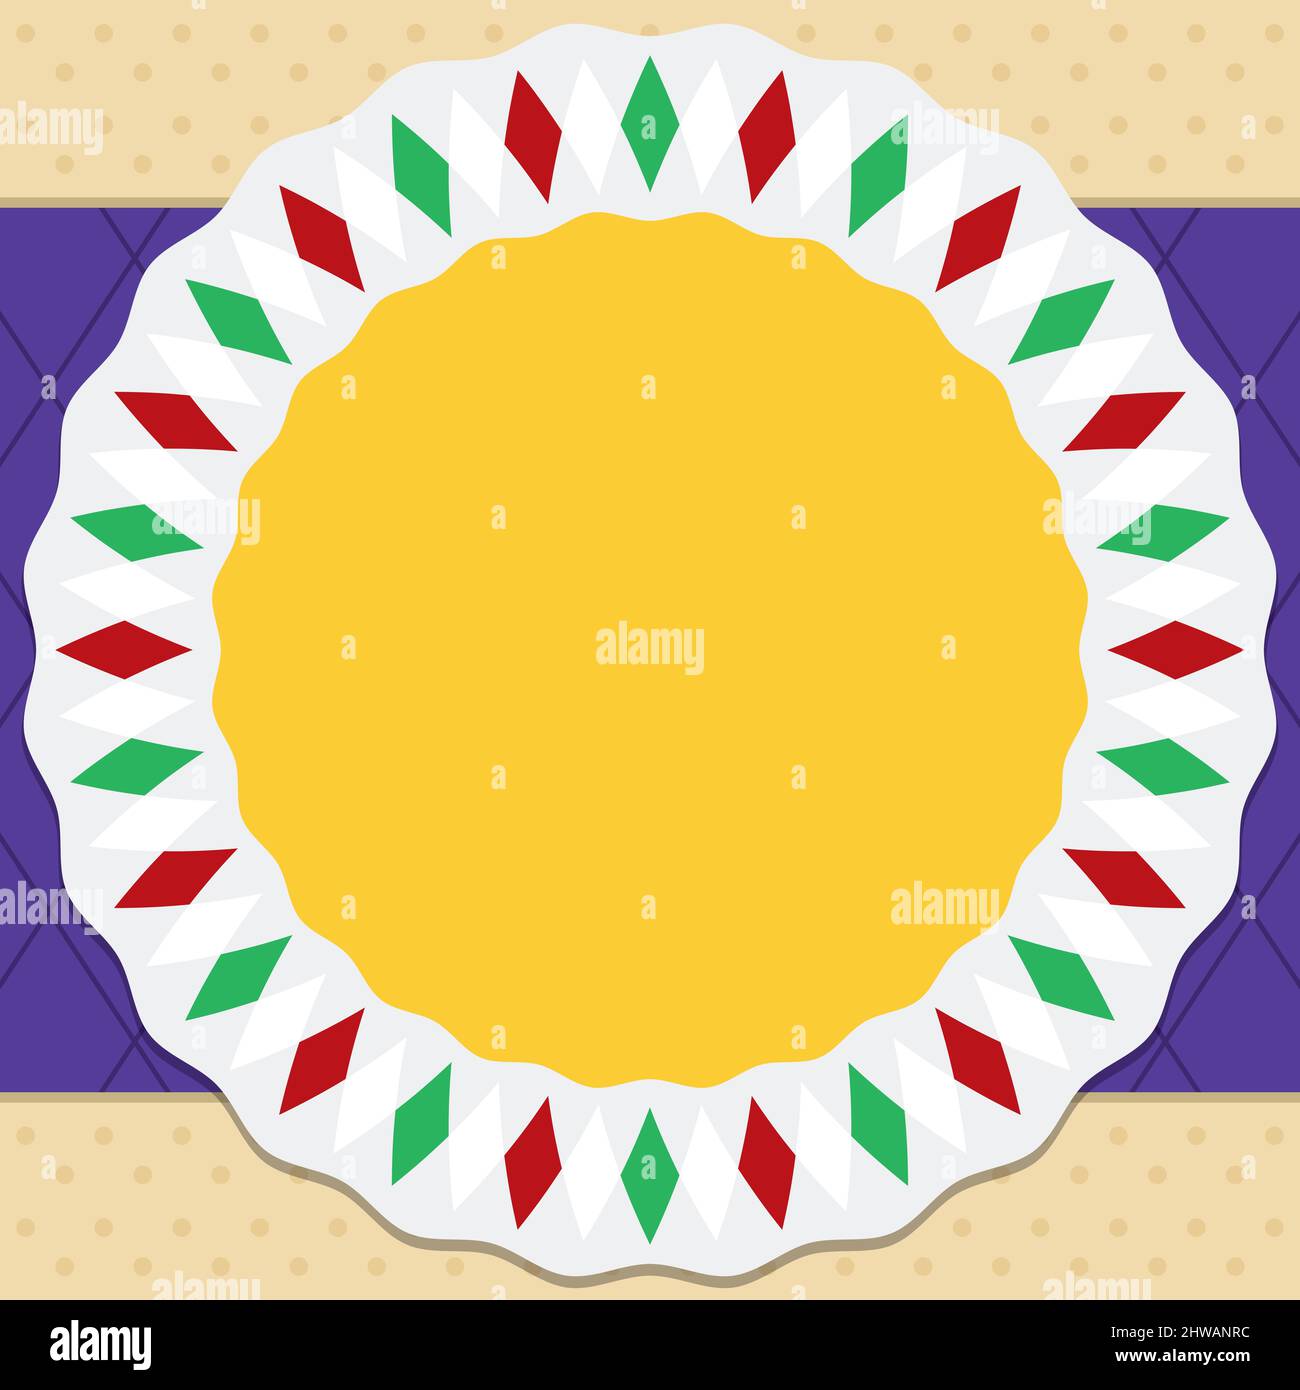 Round button template with rhombus, over purple checkered label and yellow background with dotted pattern. Stock Vector